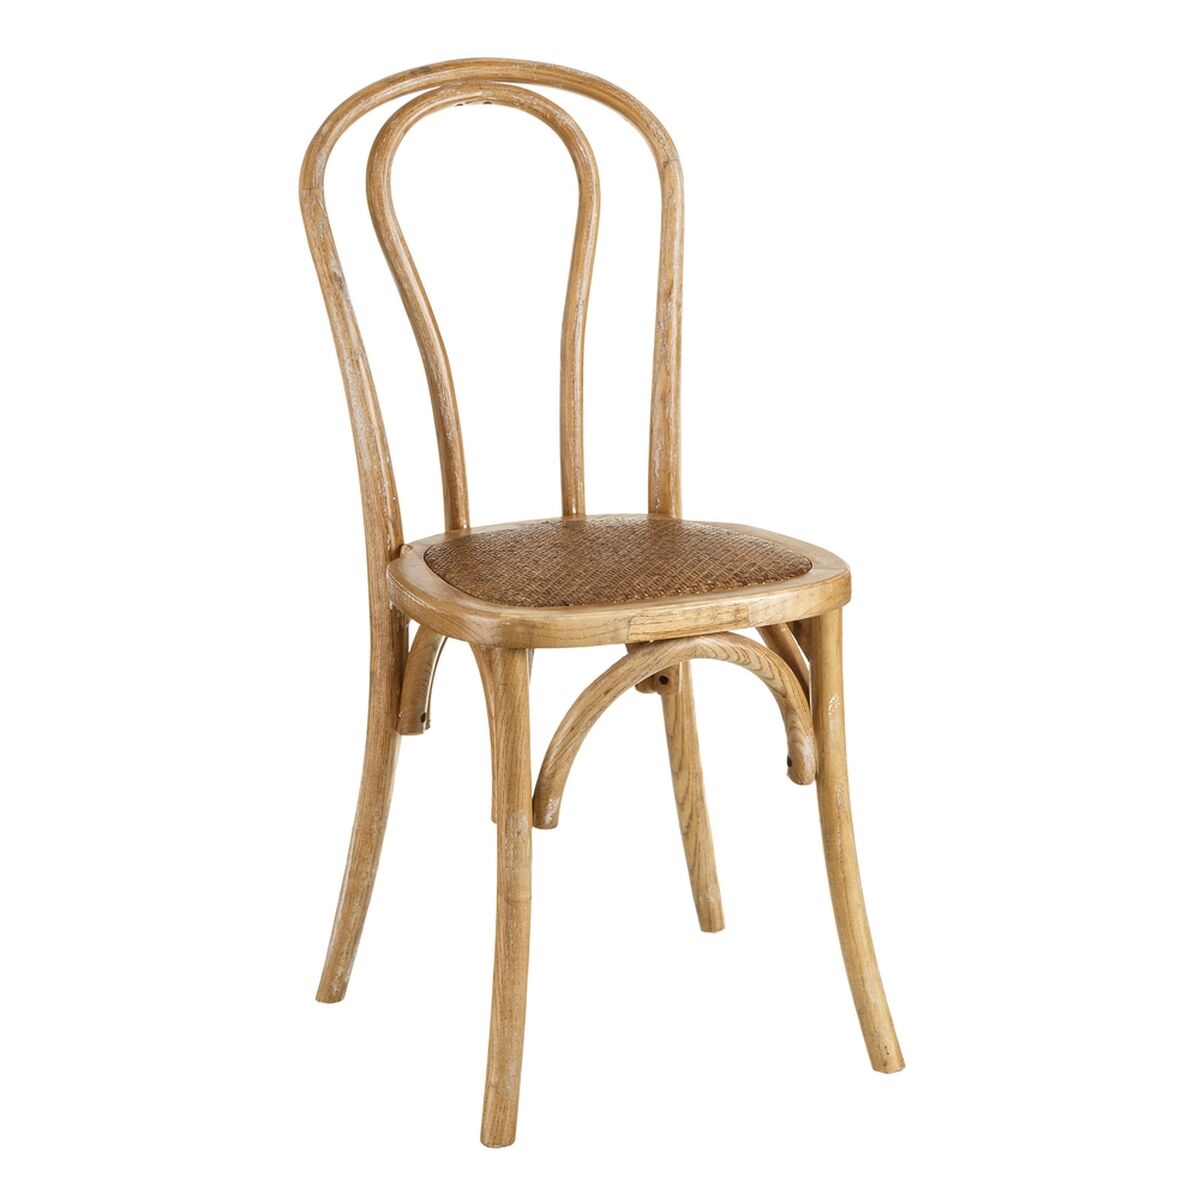 Wooden Dining Chair (42 x 41 x 89 cm)